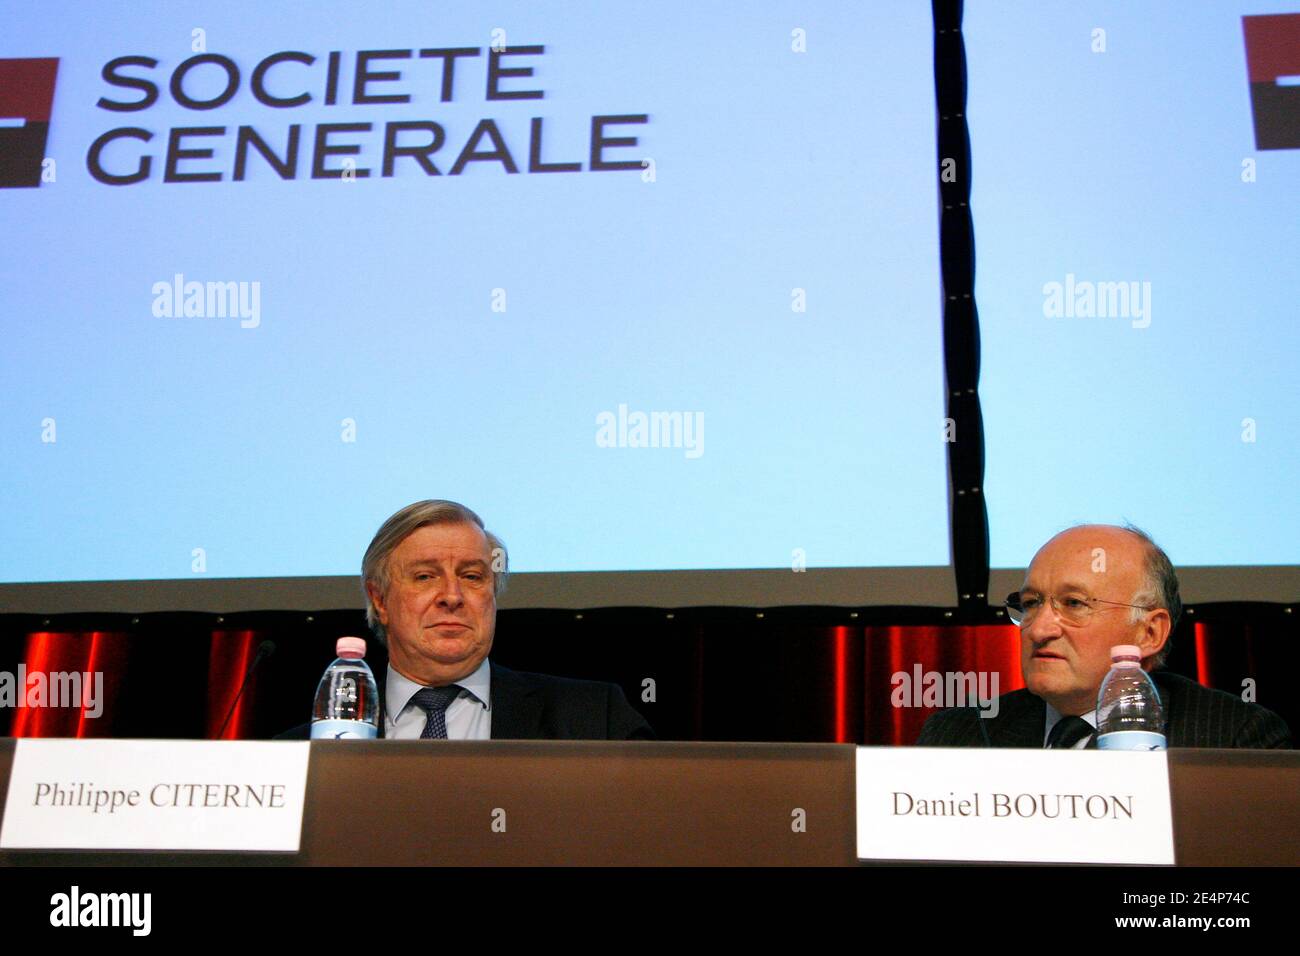 Societe Generale Vice CEO Philippe Citerne and Societe Generale CEO Daniel Bouton during a press conference, January 24, 2008 in La Defense, near Paris, France. Trading in shares of Societe Generale was supended, January 24, 2008, after the French banking giant announced a sole trader was responsible for racking up 4.9 billion euros (7.15 billion dollars) in losses. Photo by Thierry Orban/ABACAPRESS.COM Stock Photo